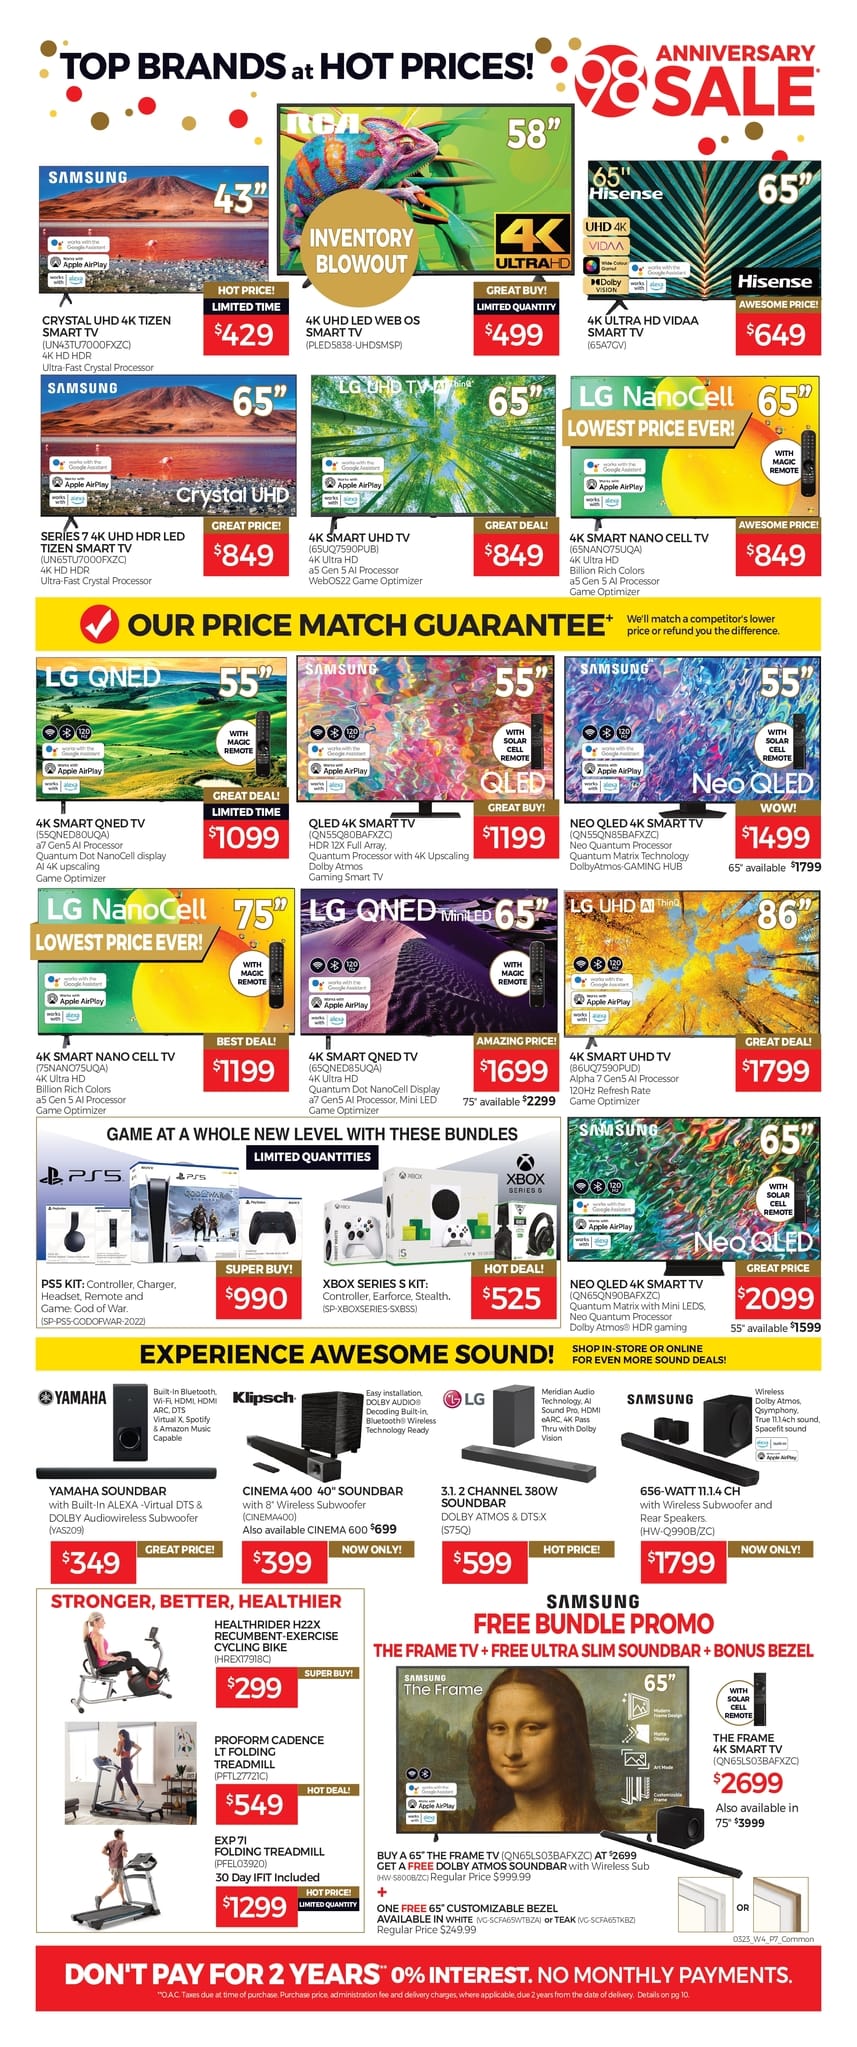 Tepperman's - Weekly Flyer Specials - Page 7